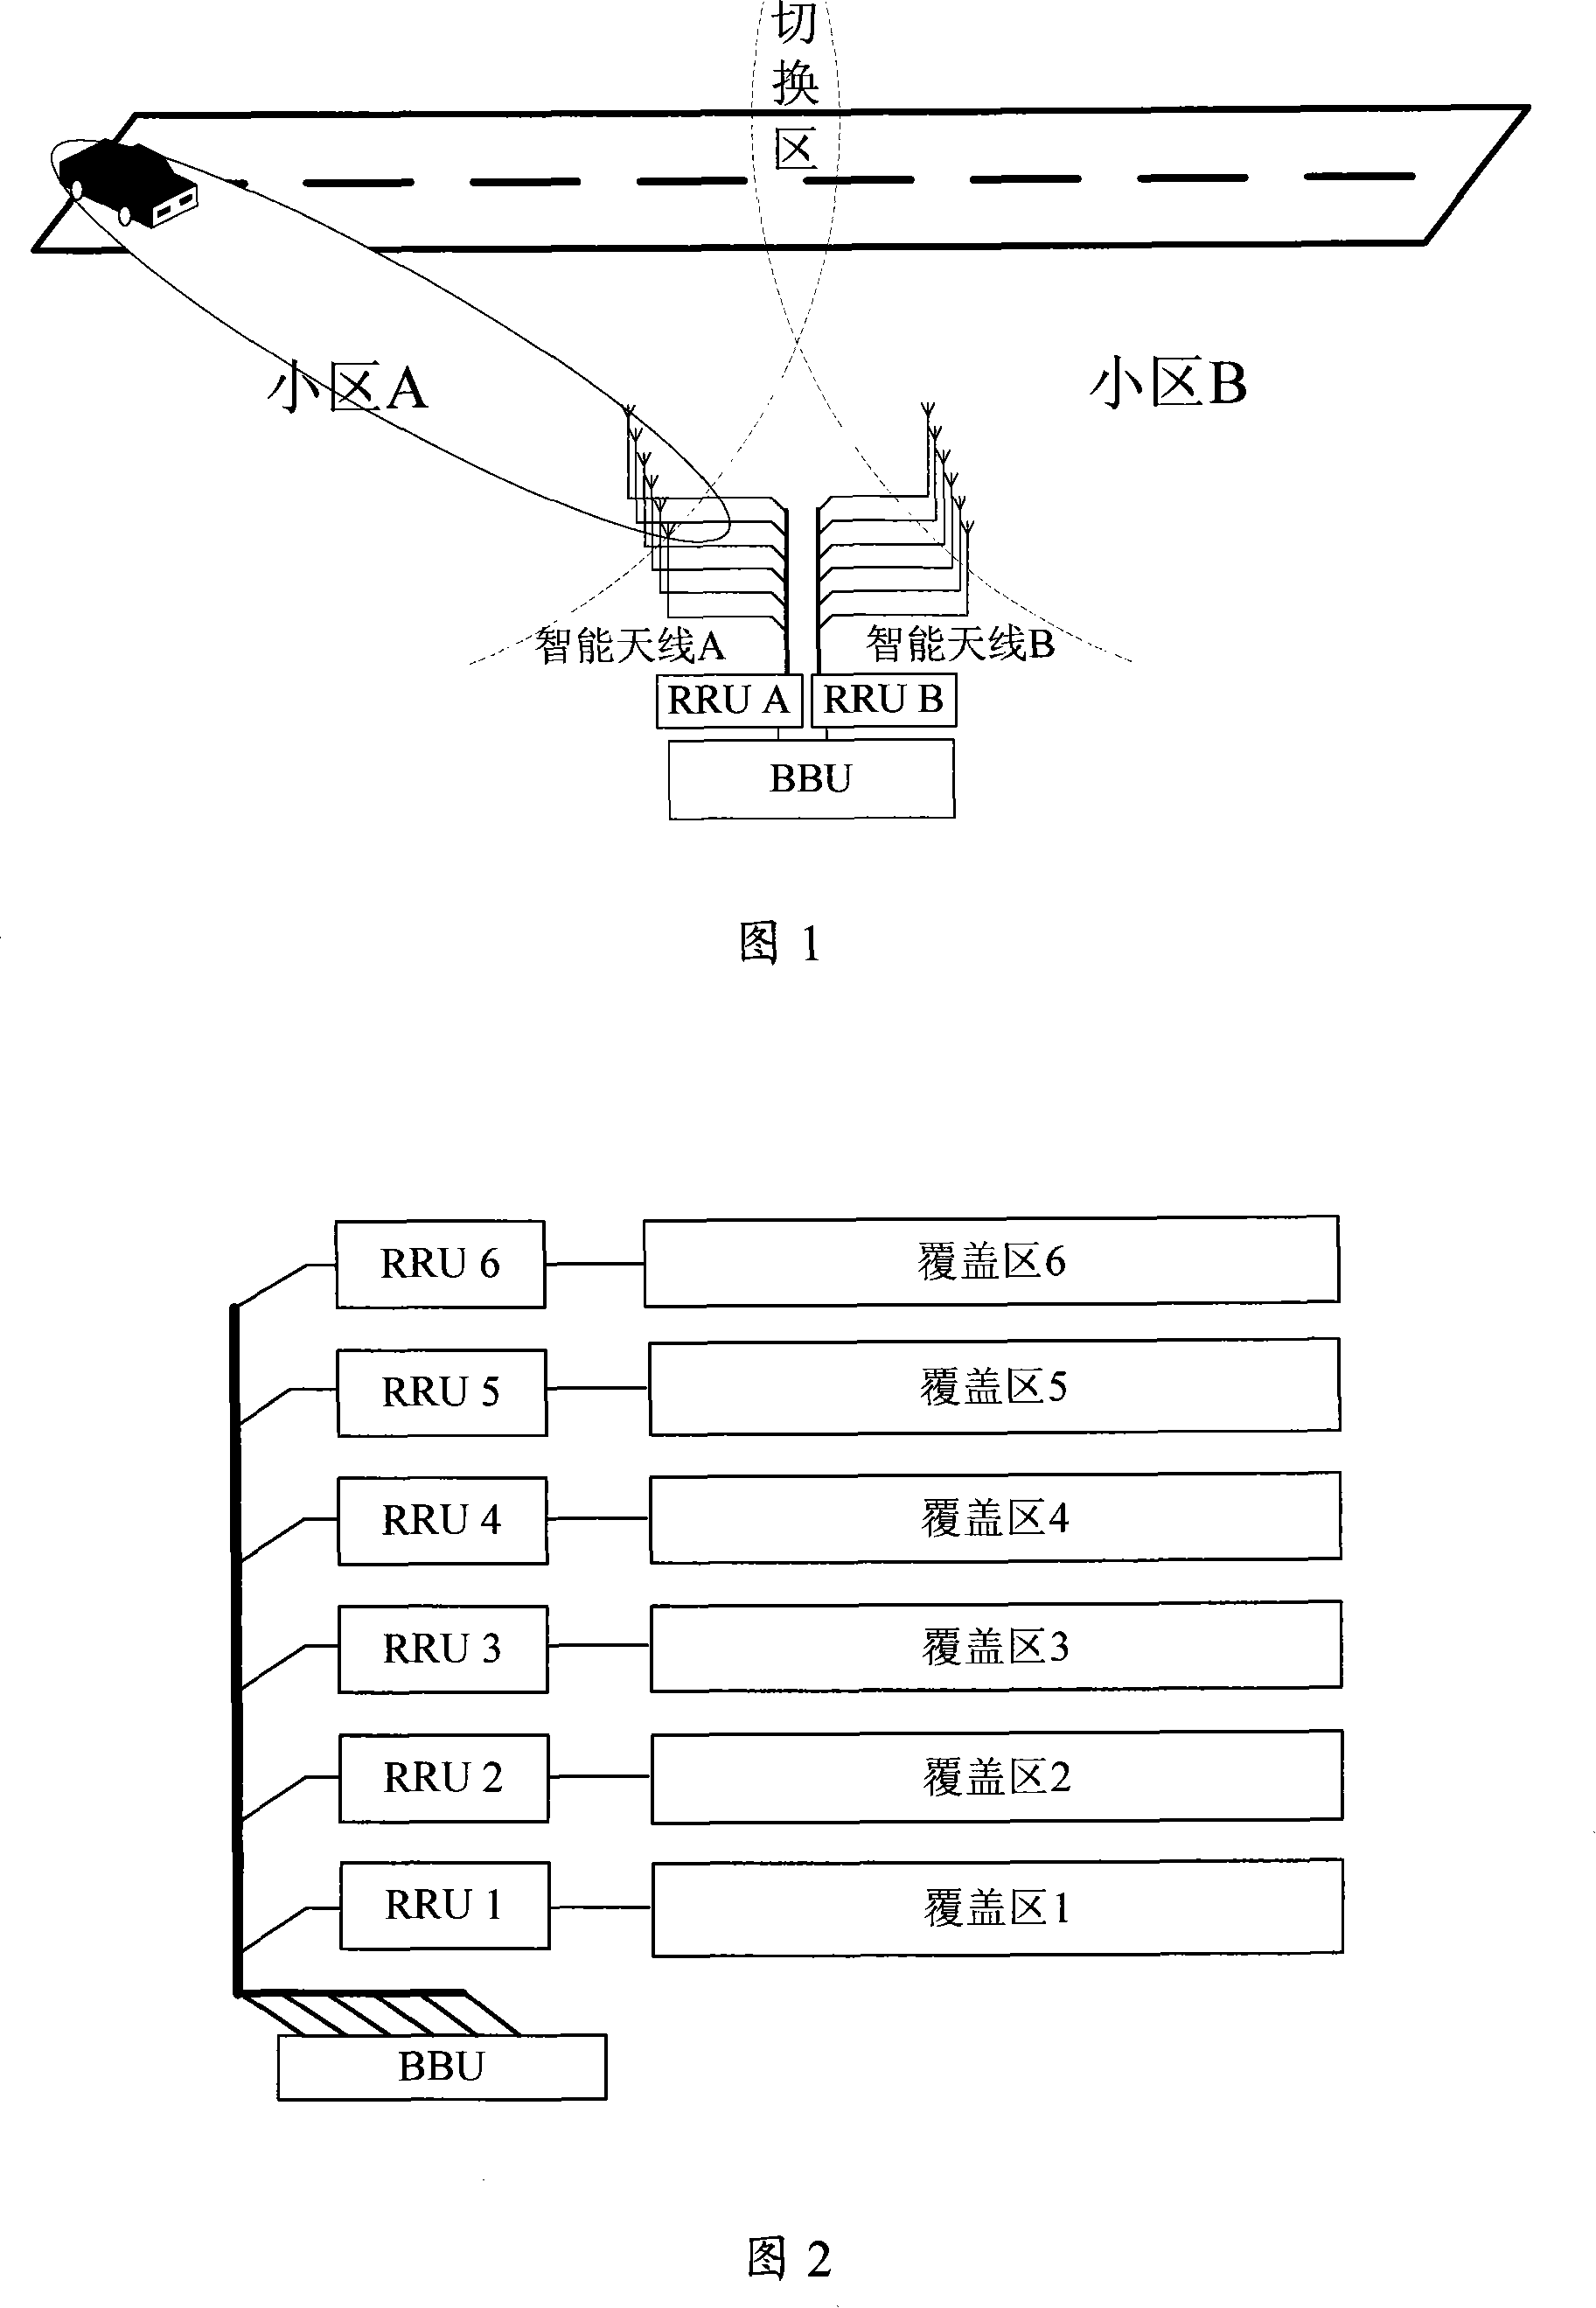 Method and system for implementing subarea overlapping using mirror-image radio frequency unit